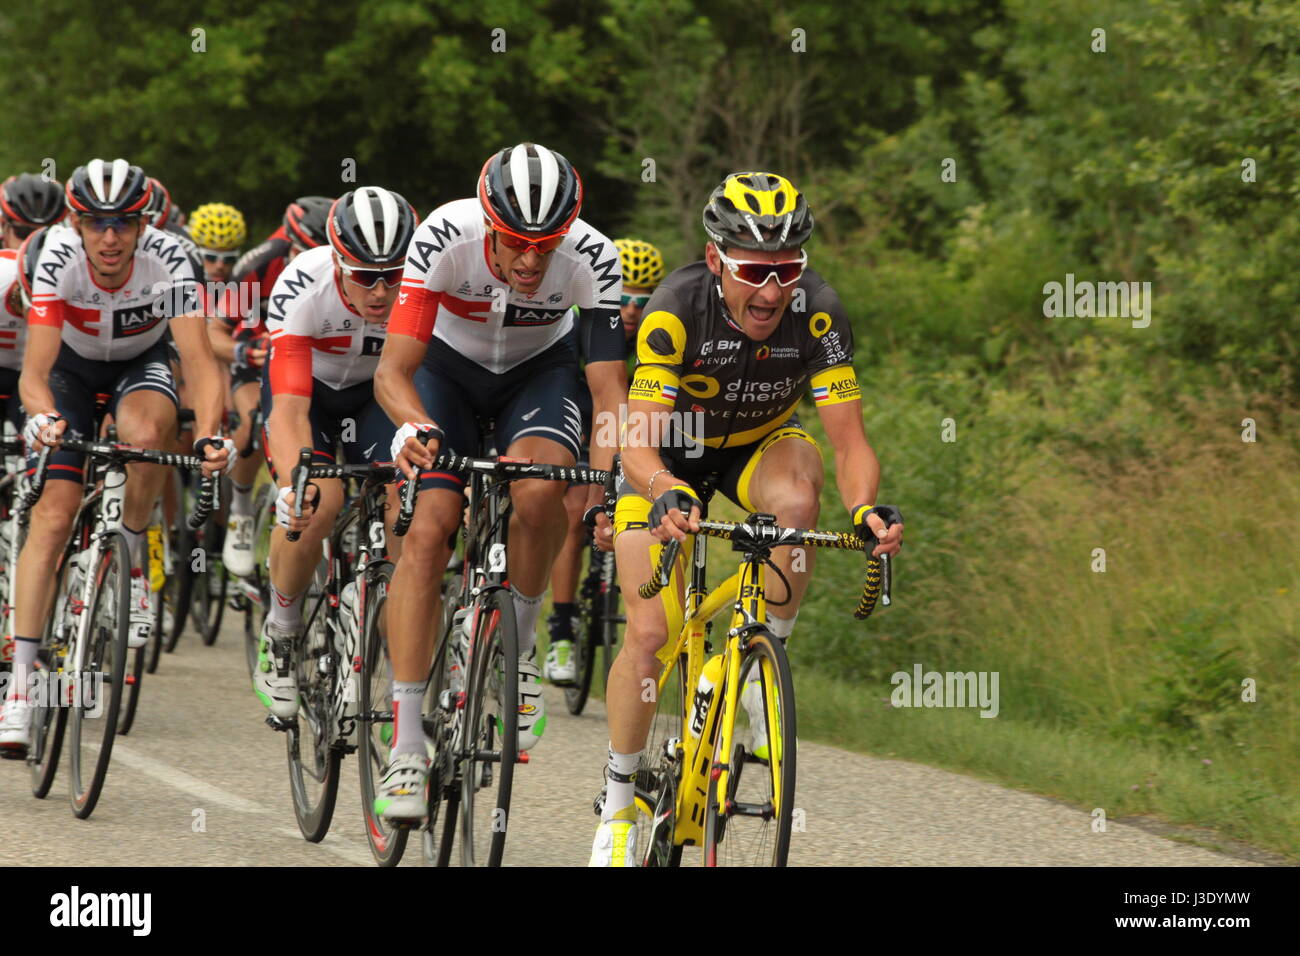 French cyclist Thomas Voeckler leads the breakaway in the Tour de France Stock Photo